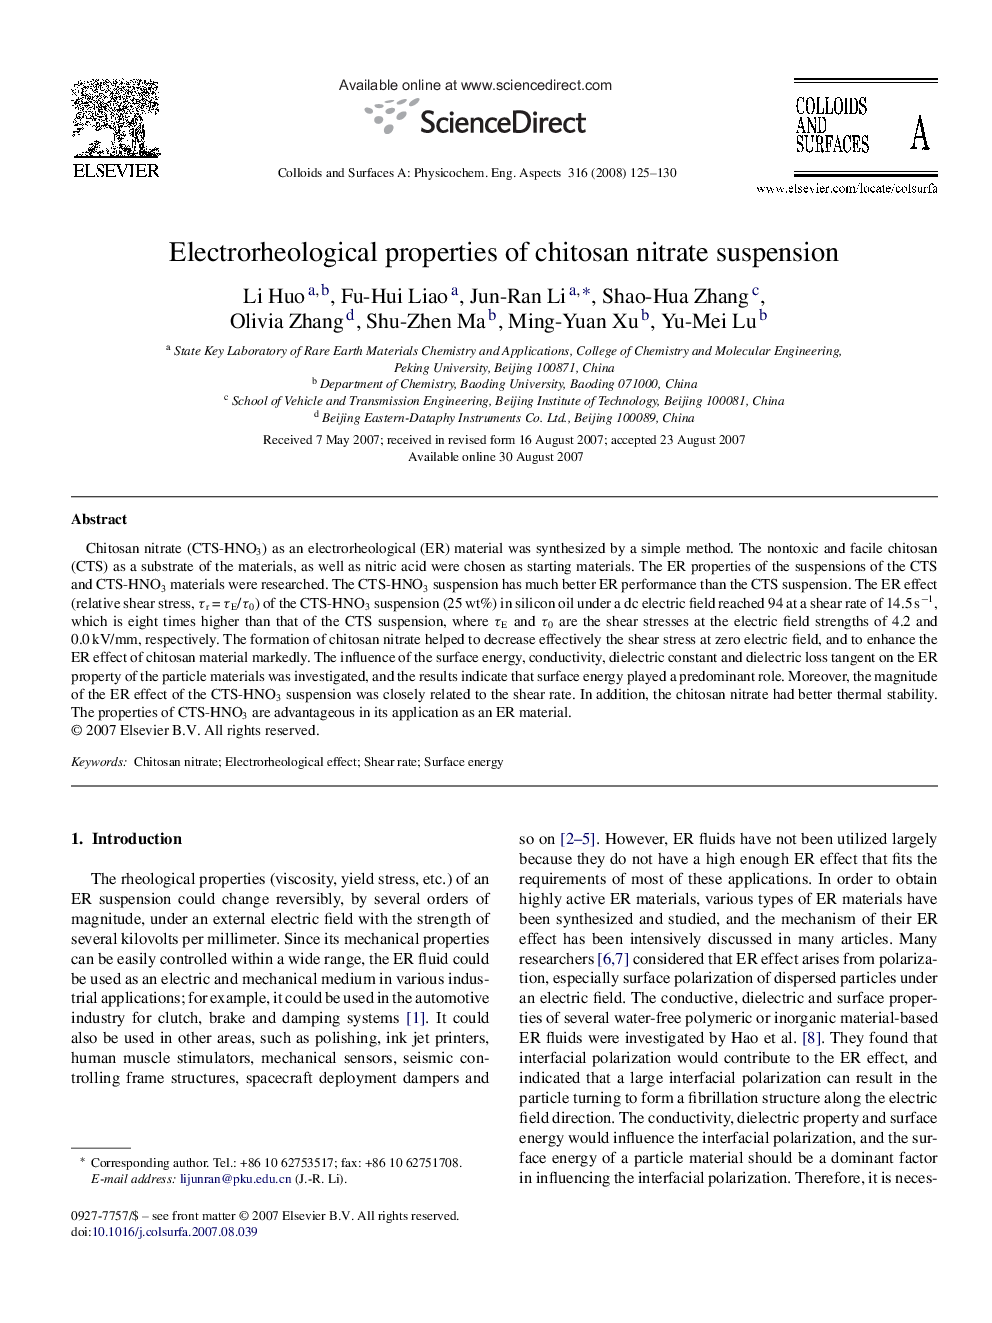 Electrorheological properties of chitosan nitrate suspension